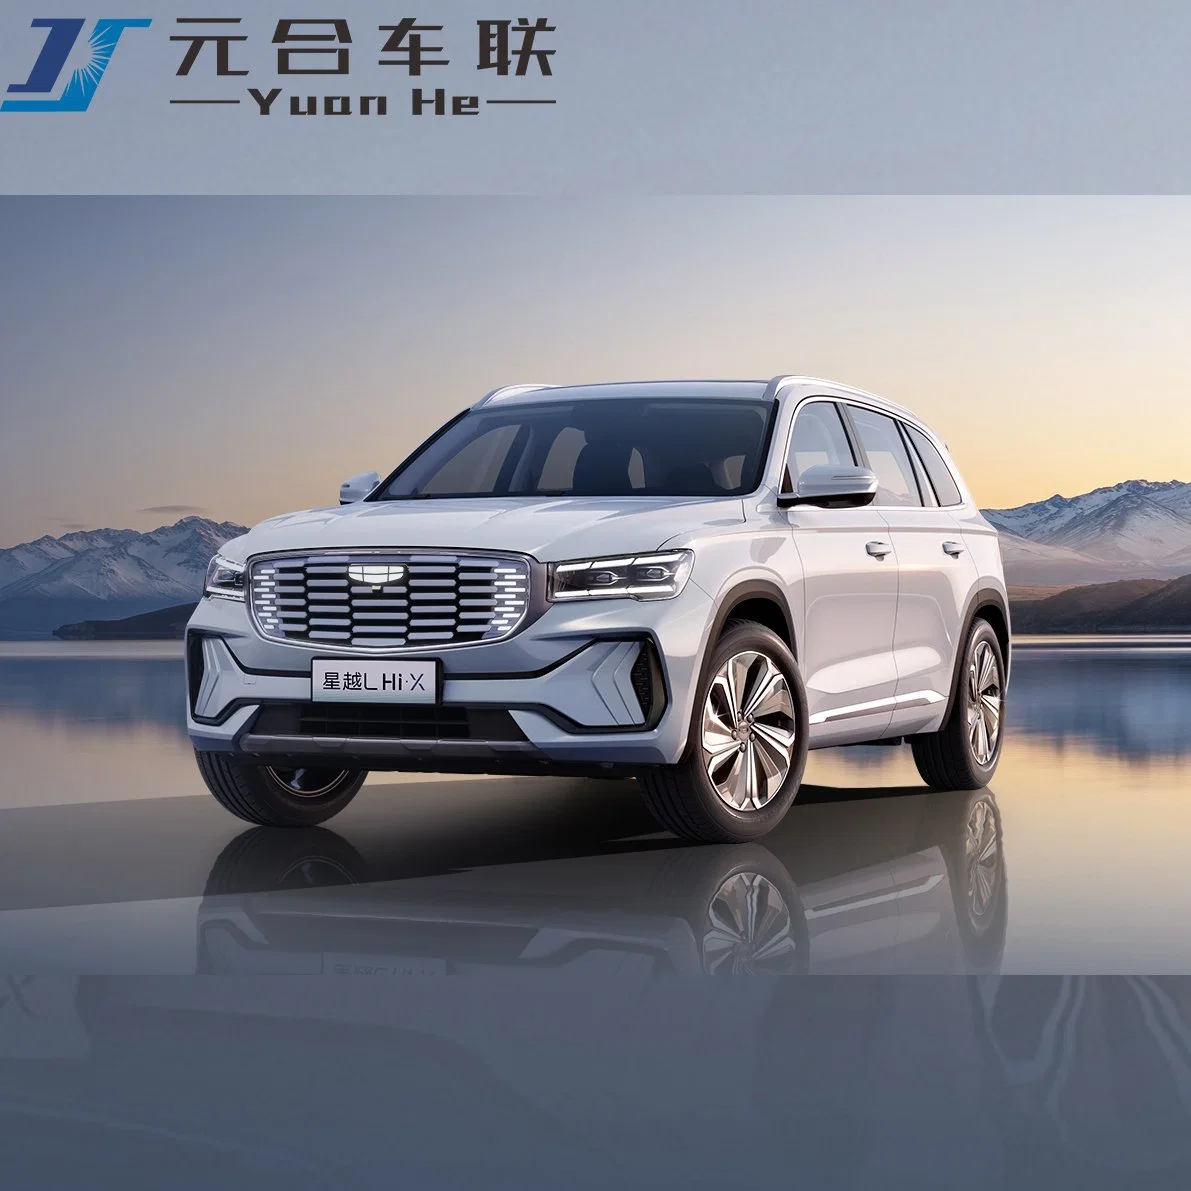 Hot Selling Used Geely Monjaro Xingyue L New Energy Vehicles 4WD Hybrid New SUV Car Chinese Electric Gelly Xingyu EV Car Vehicle Adult